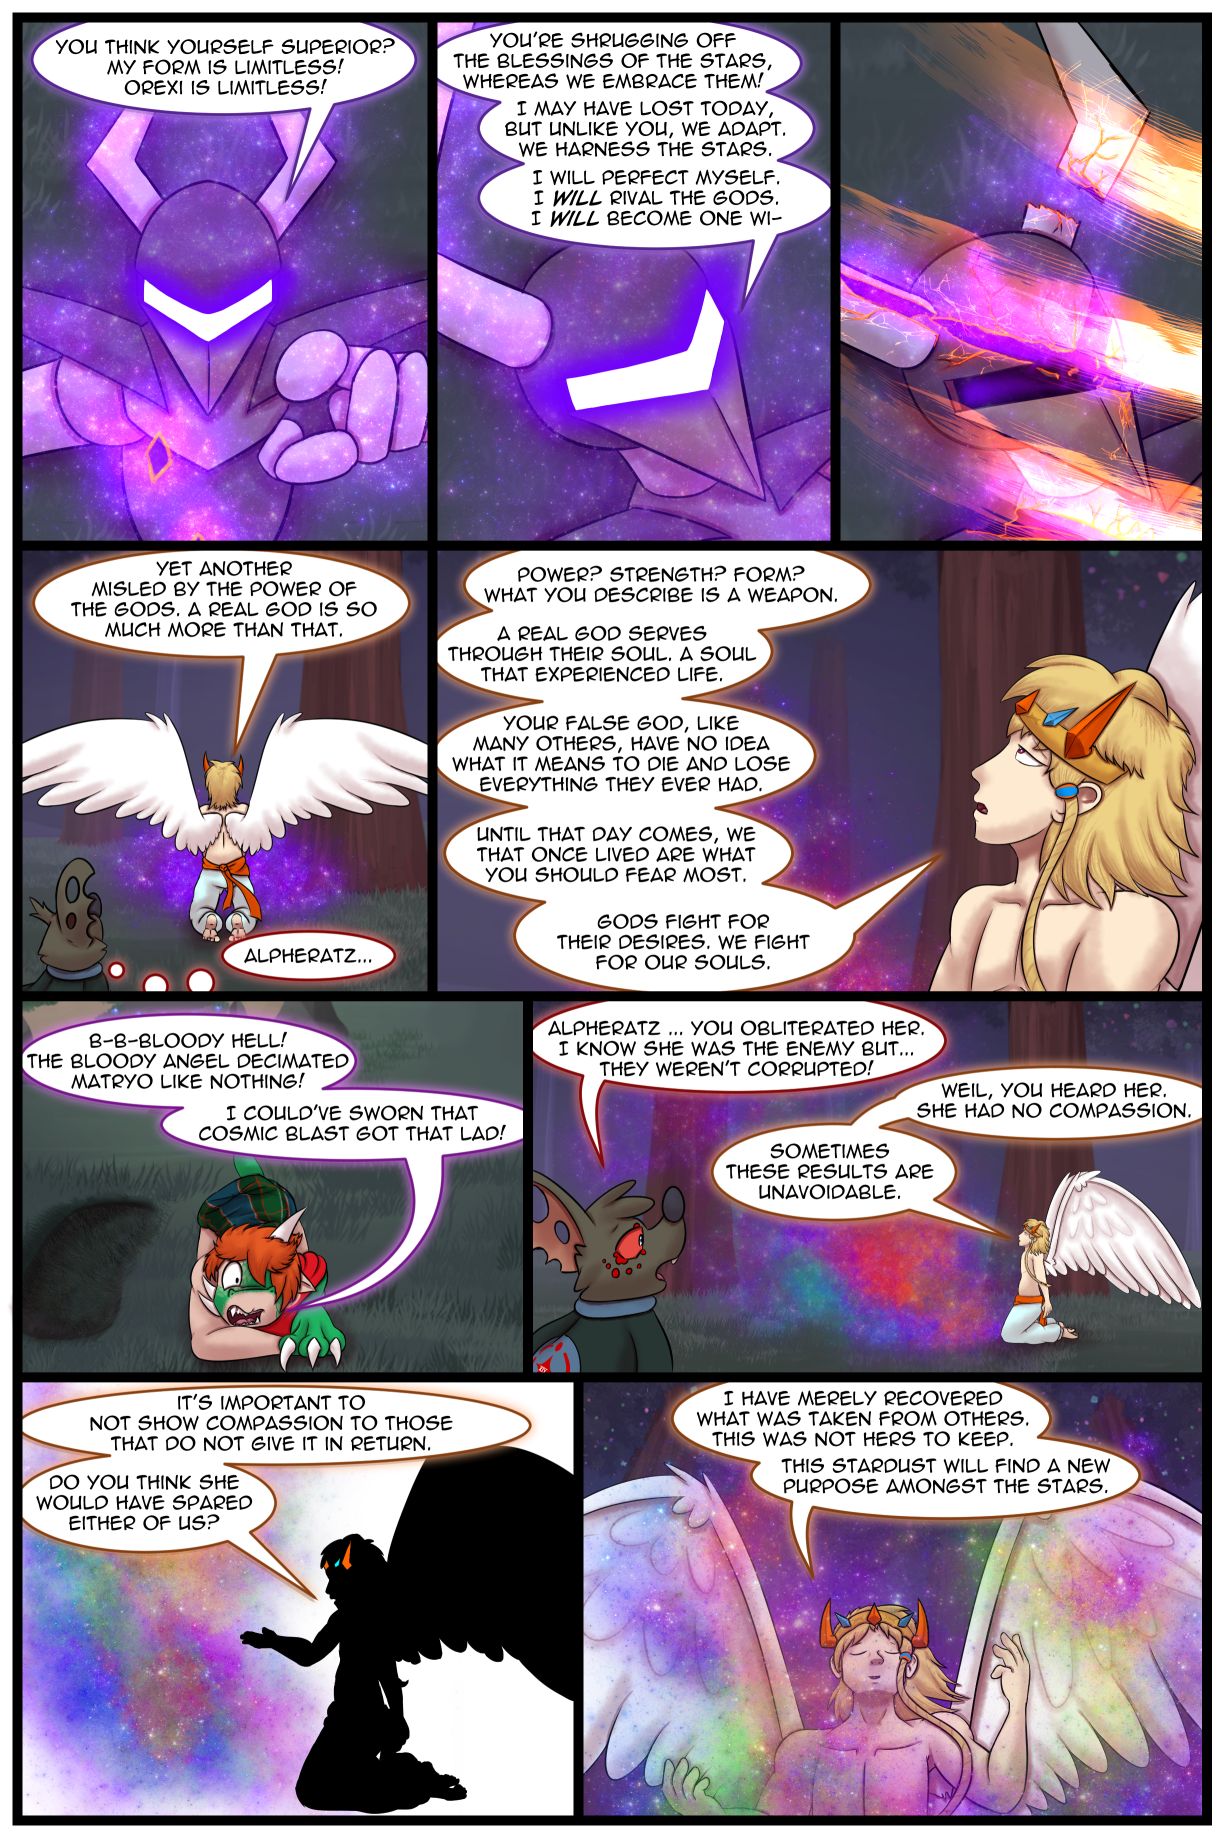 Ch5 Page 24 – Unavoidable